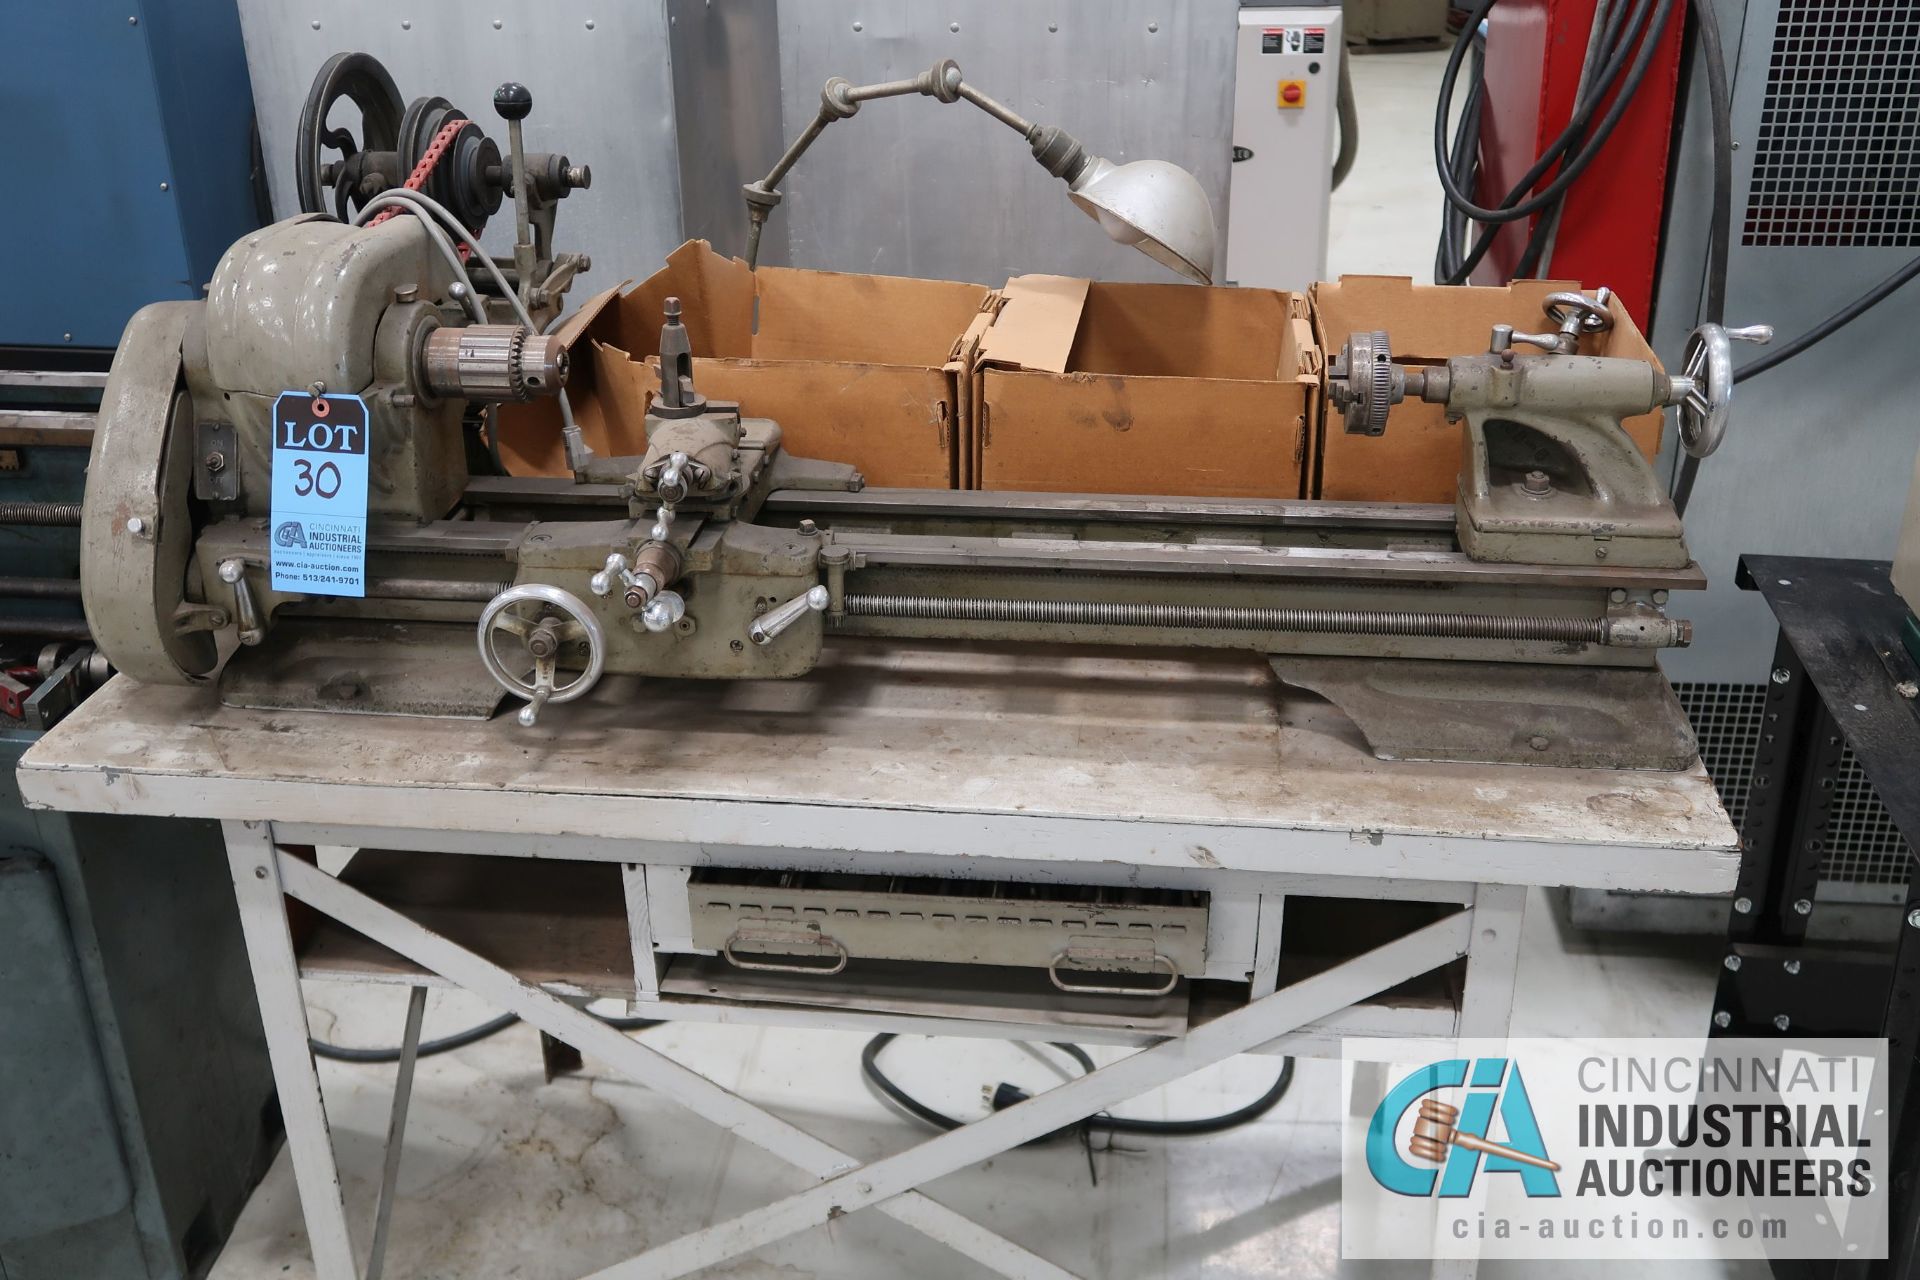 ATLAS MODEL TH48 BENCH TOP LATHE; S/N 058298, WITH WORK BENCH AND MACHINE ACCESSORIES, 110 VOLT